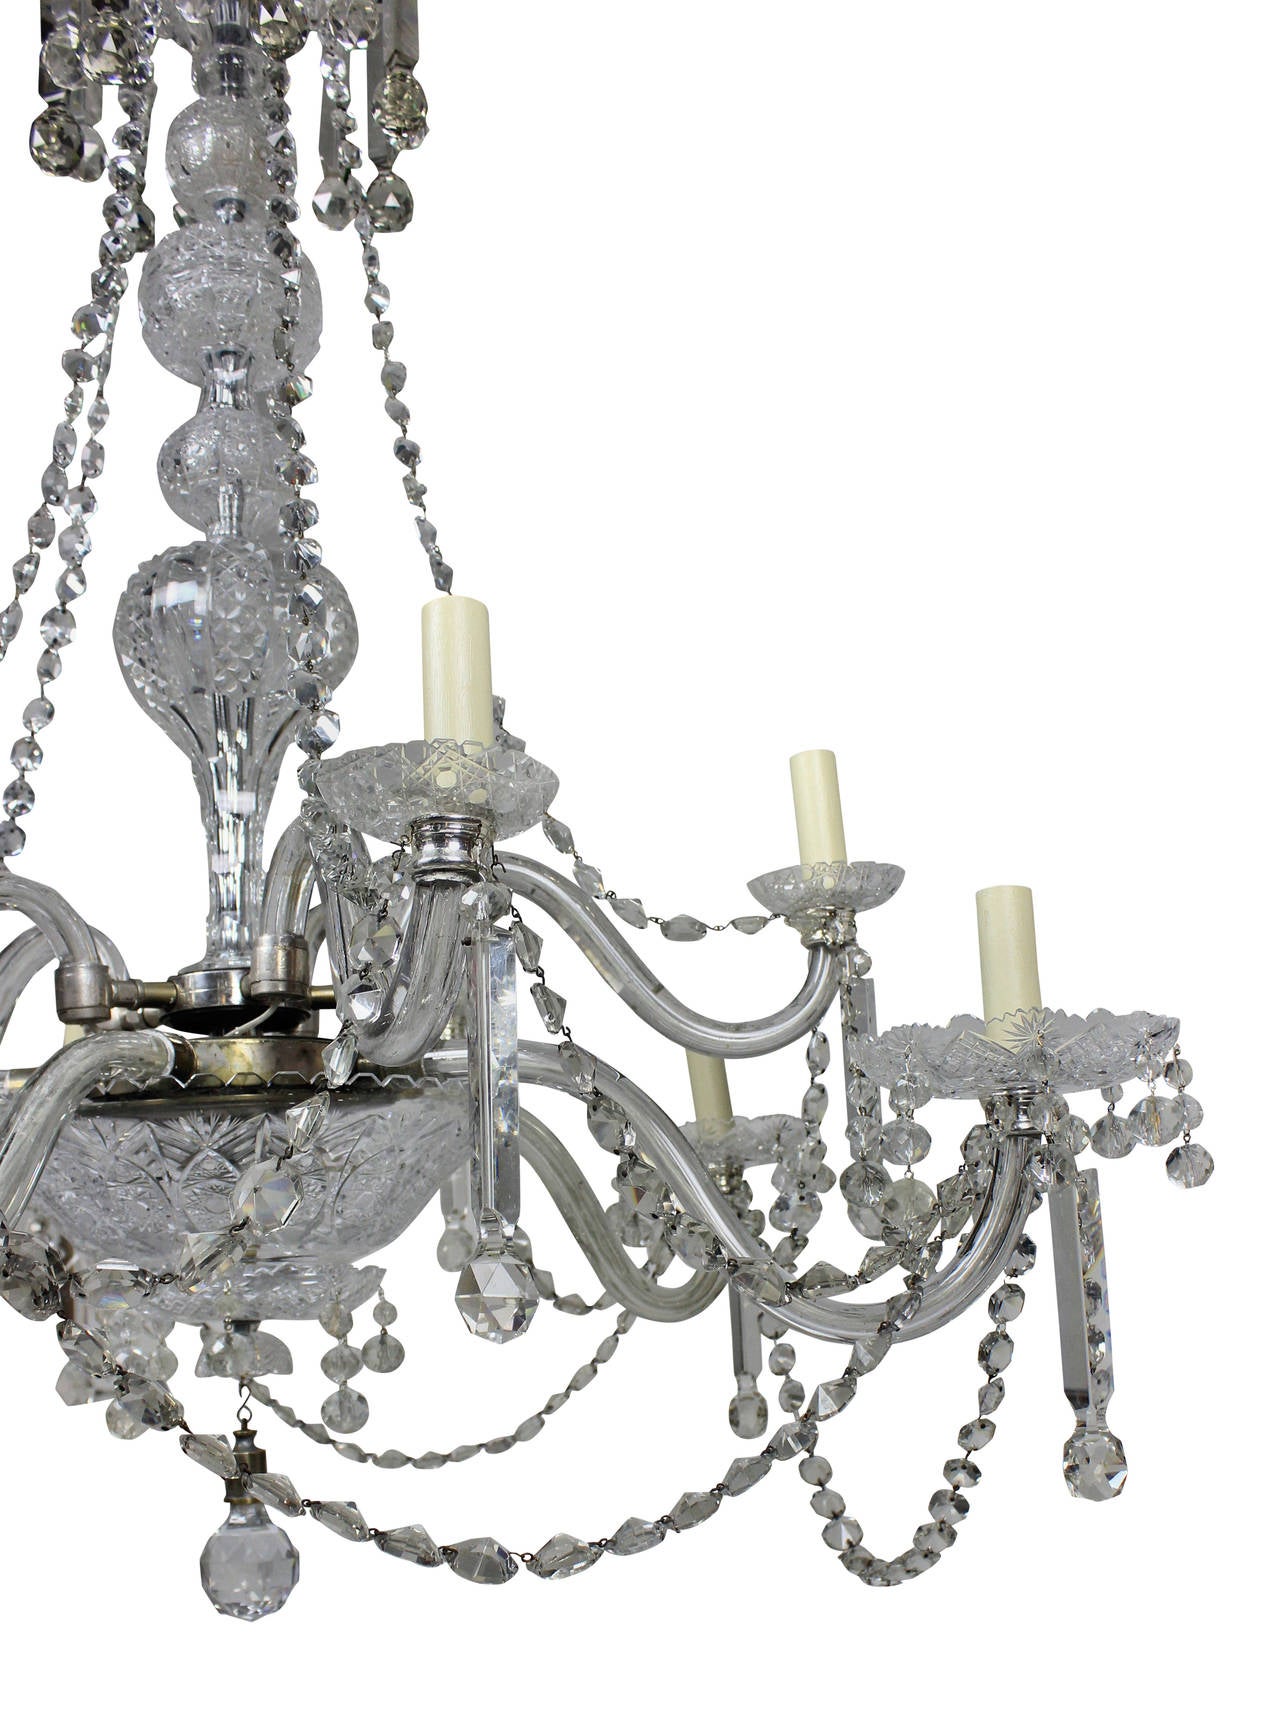 A large English cut-glass chandelier of good quality. Profusely handcut throughout, hung with good quality prism drops, formerly a gasolier.